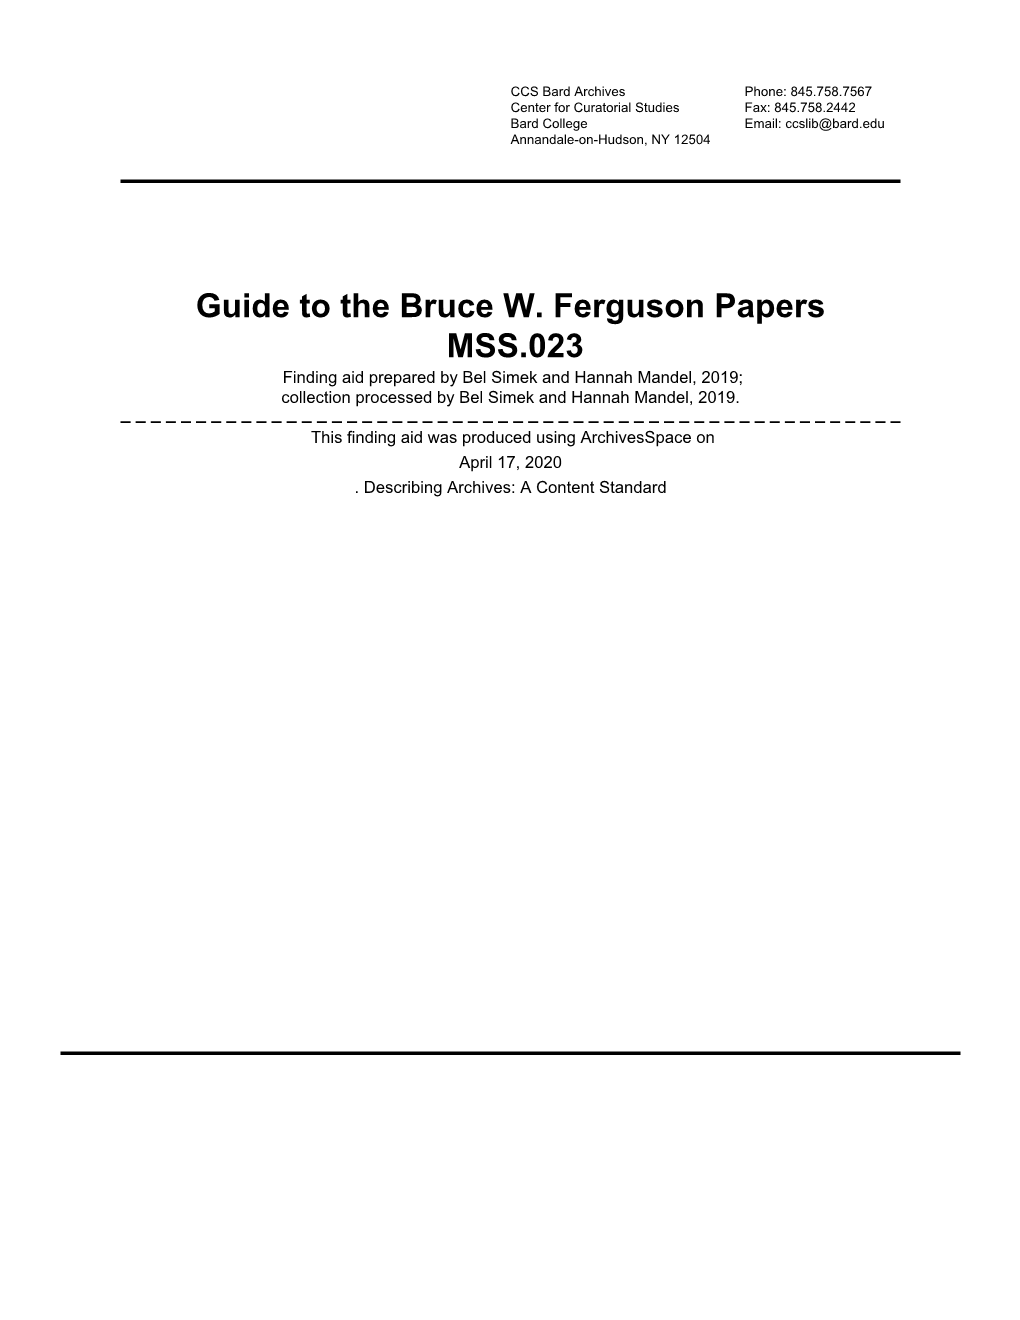 Guide to the Bruce W. Ferguson Papers MSS.023 Finding Aid Prepared by Bel Simek and Hannah Mandel, 2019; Collection Processed by Bel Simek and Hannah Mandel, 2019